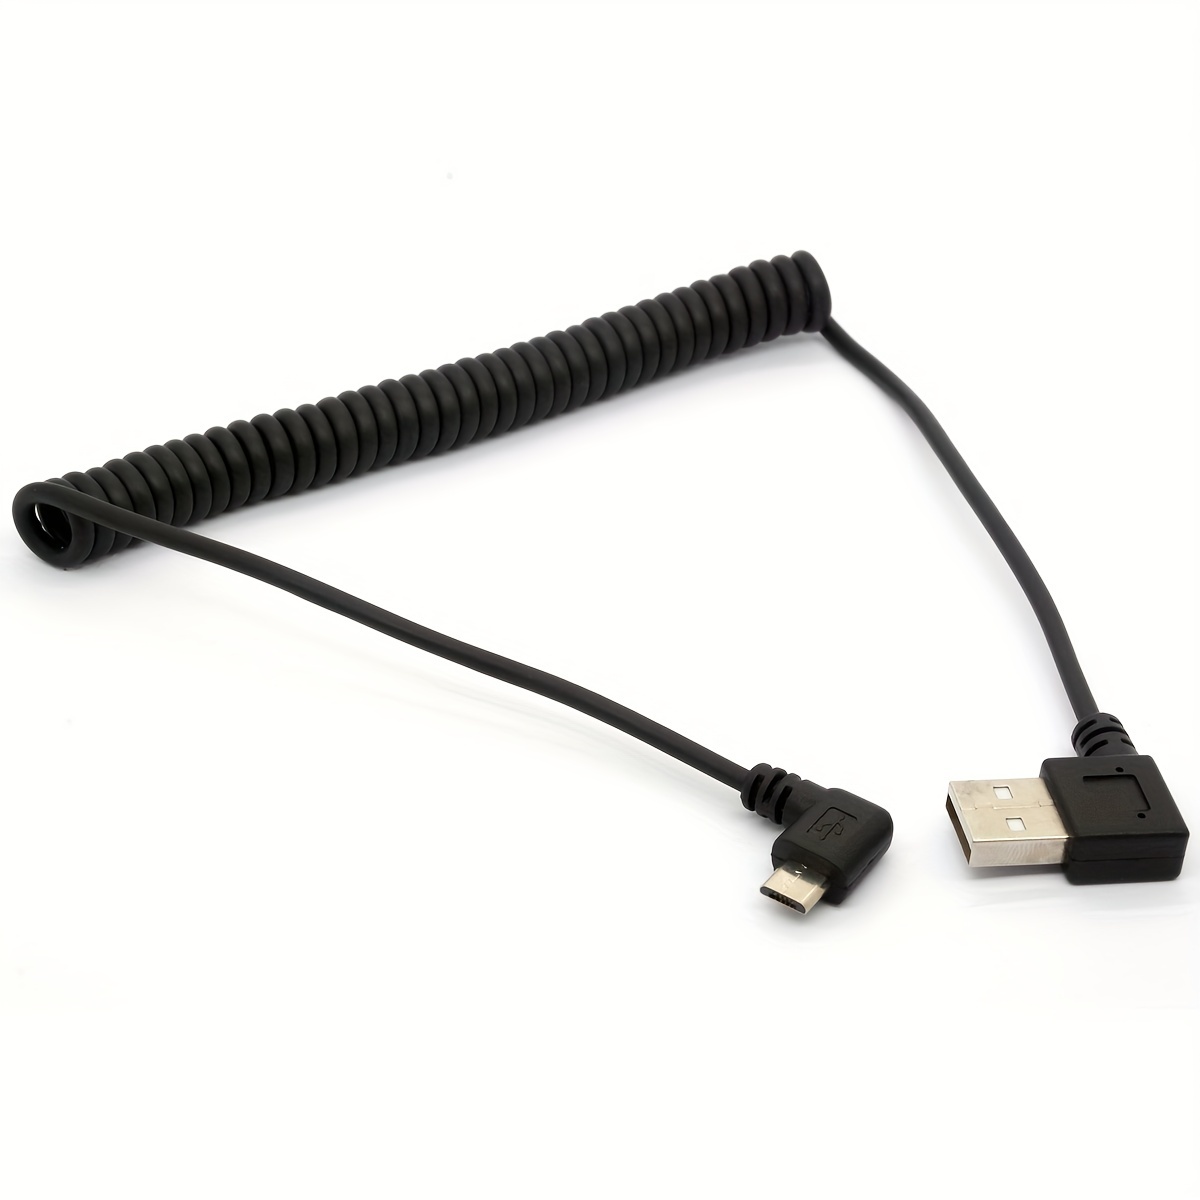 Micro USB 3.0 (Type-B) Cable (1-Meter)